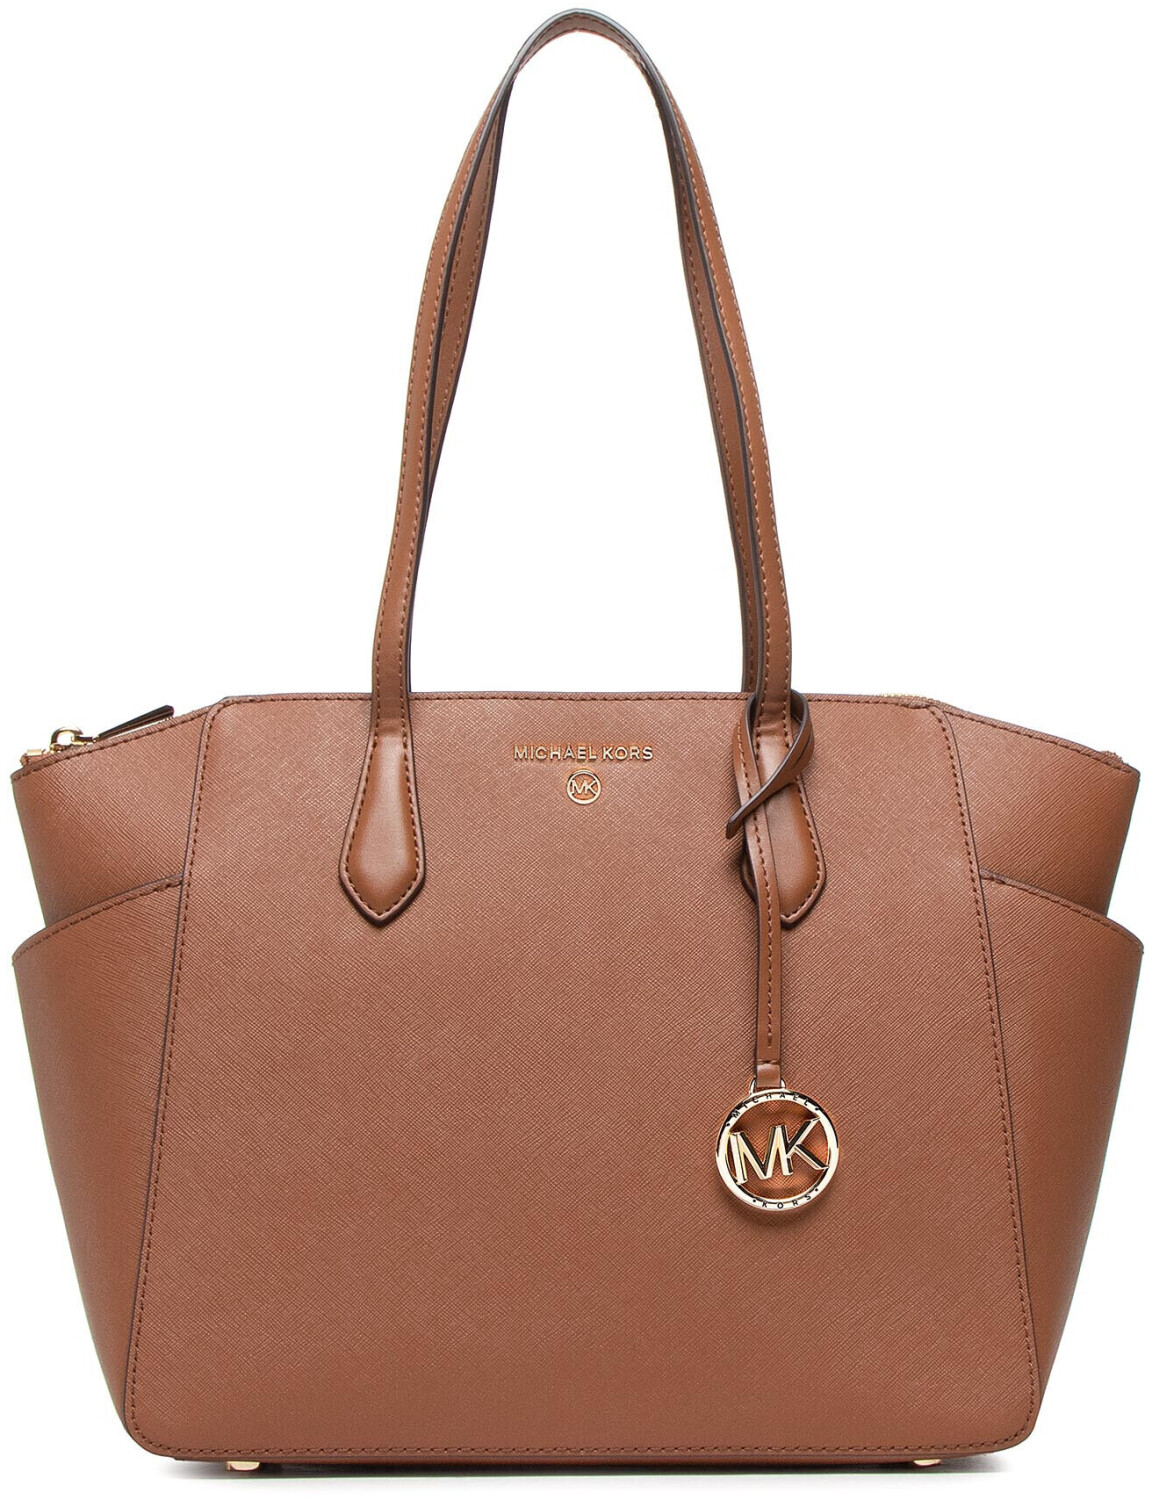 Photos - Travel Bags Michael Kors Marilyn 30S2G6AT2L luggage 